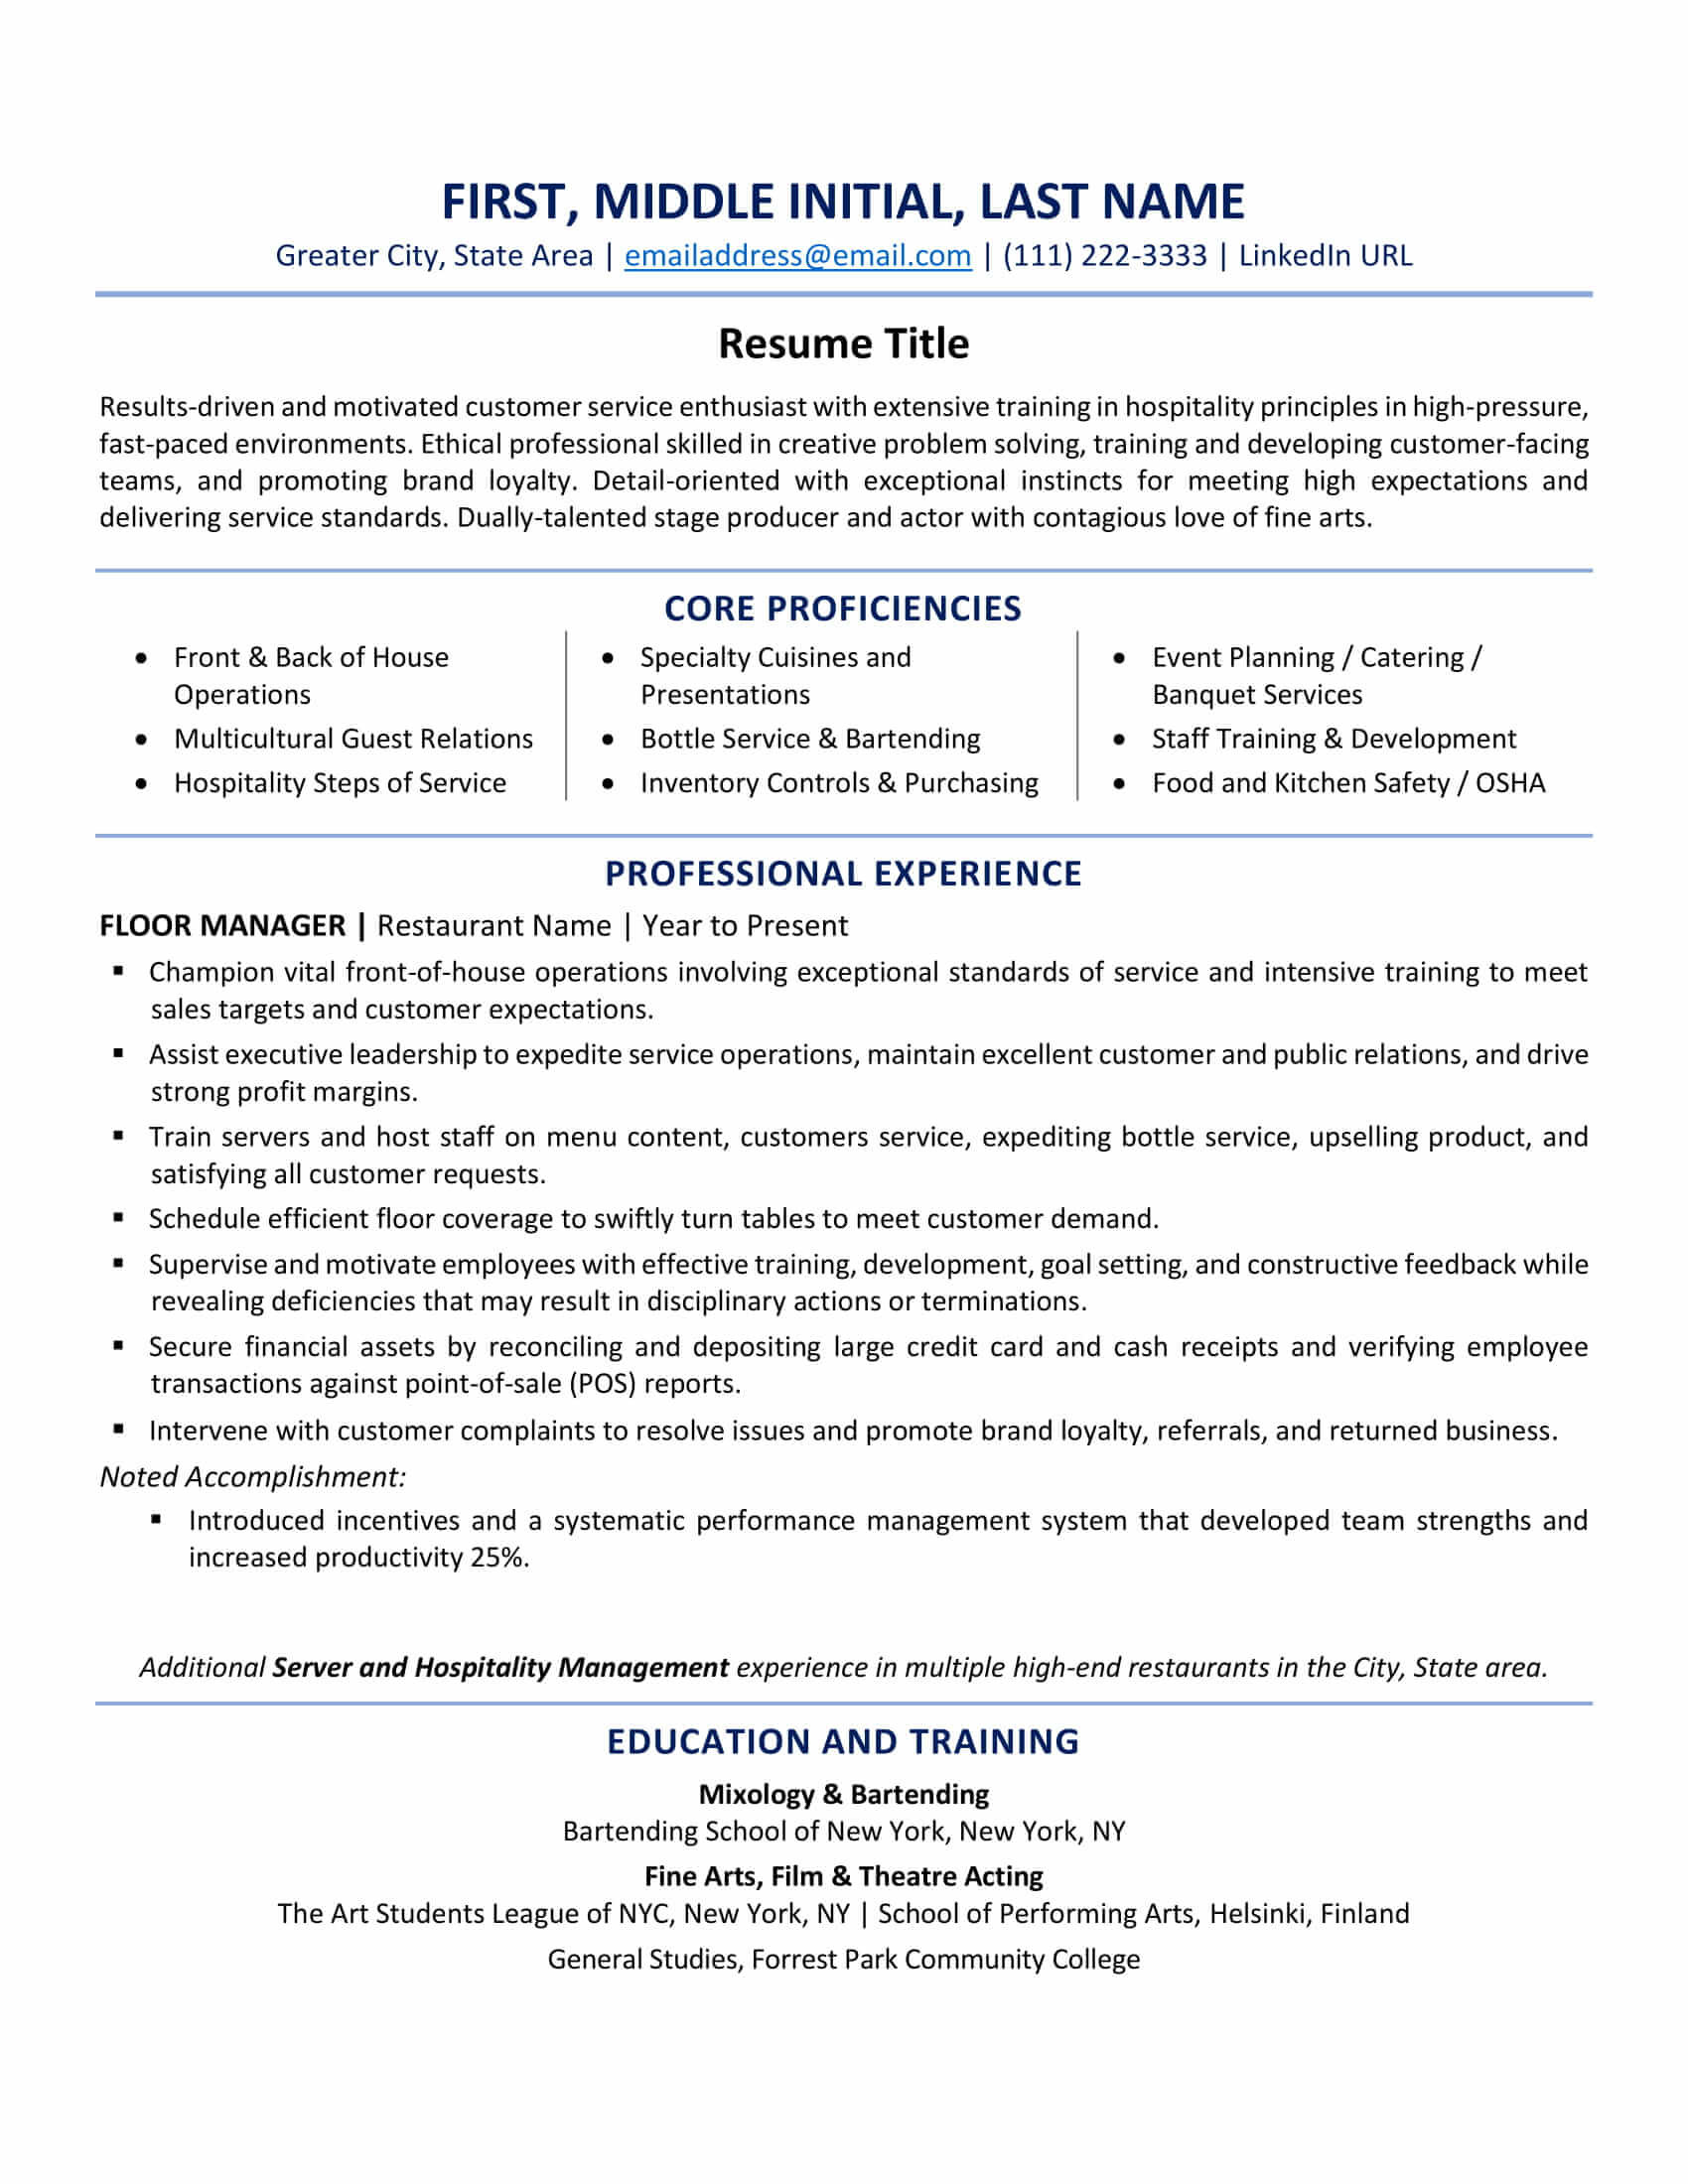 Sample Resumes for People.over 50 Returning to Work 7 No-fail Resume Tips for Older Workers (lancarrezekiq Examples) Zipjob